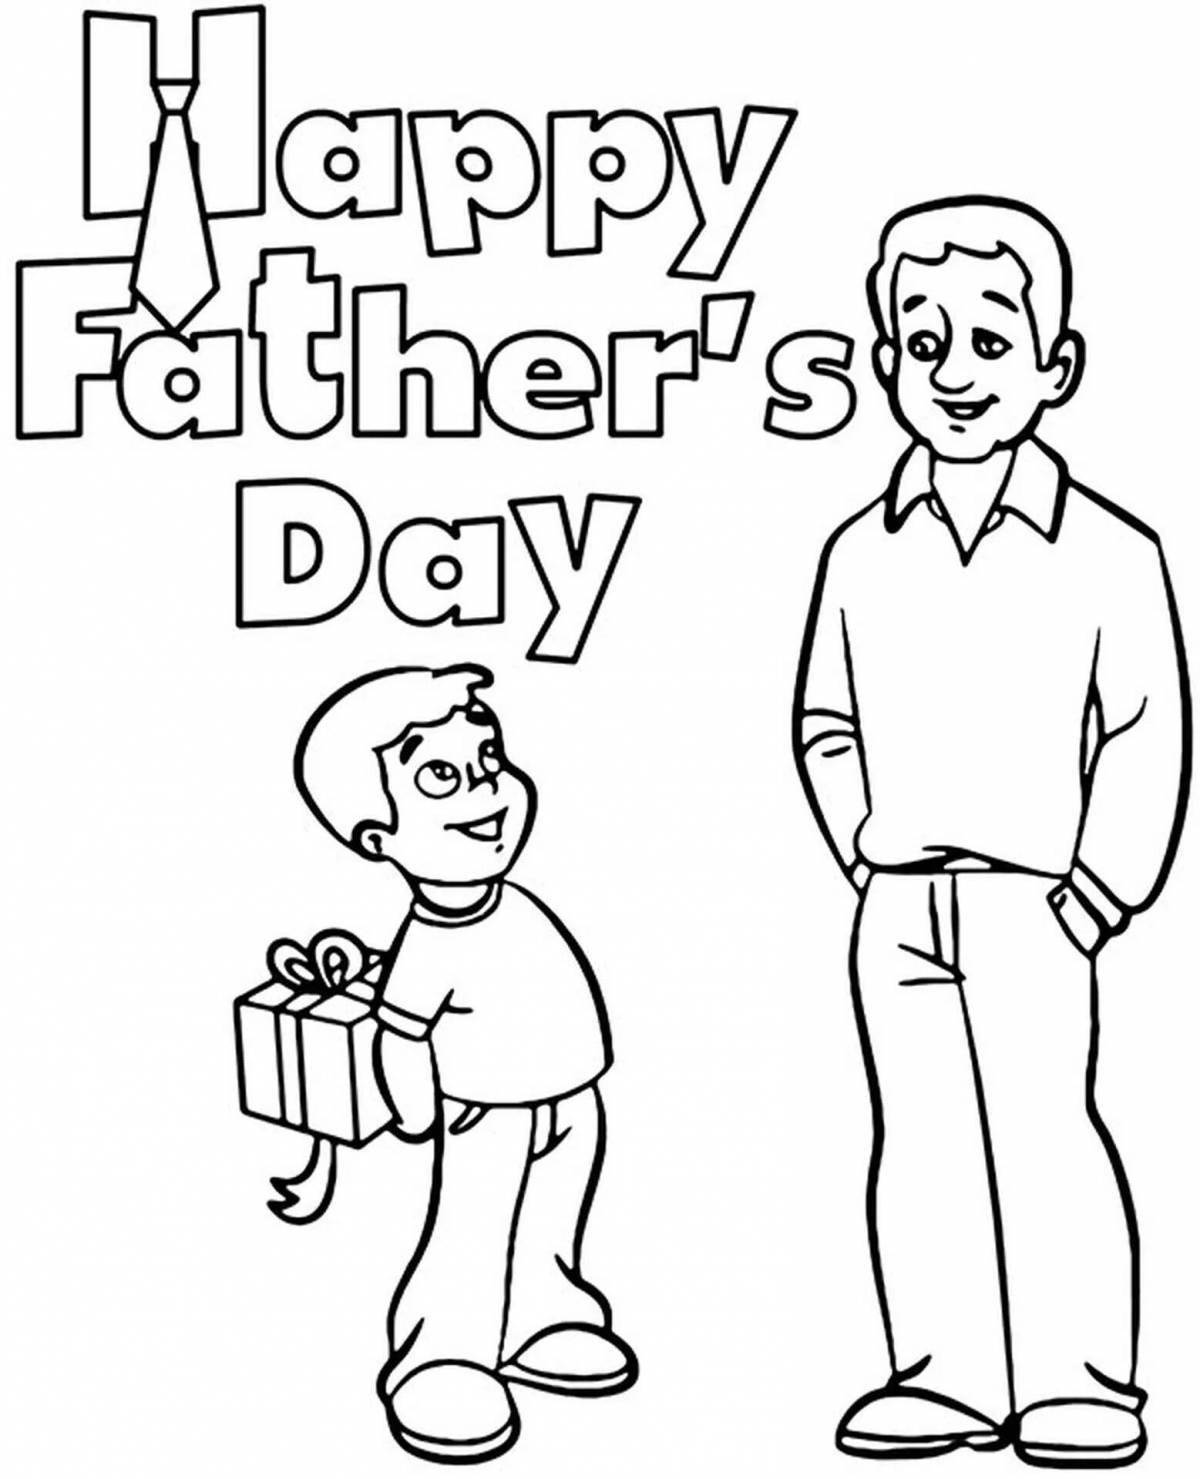 Soulful coloring for dad for dad's day